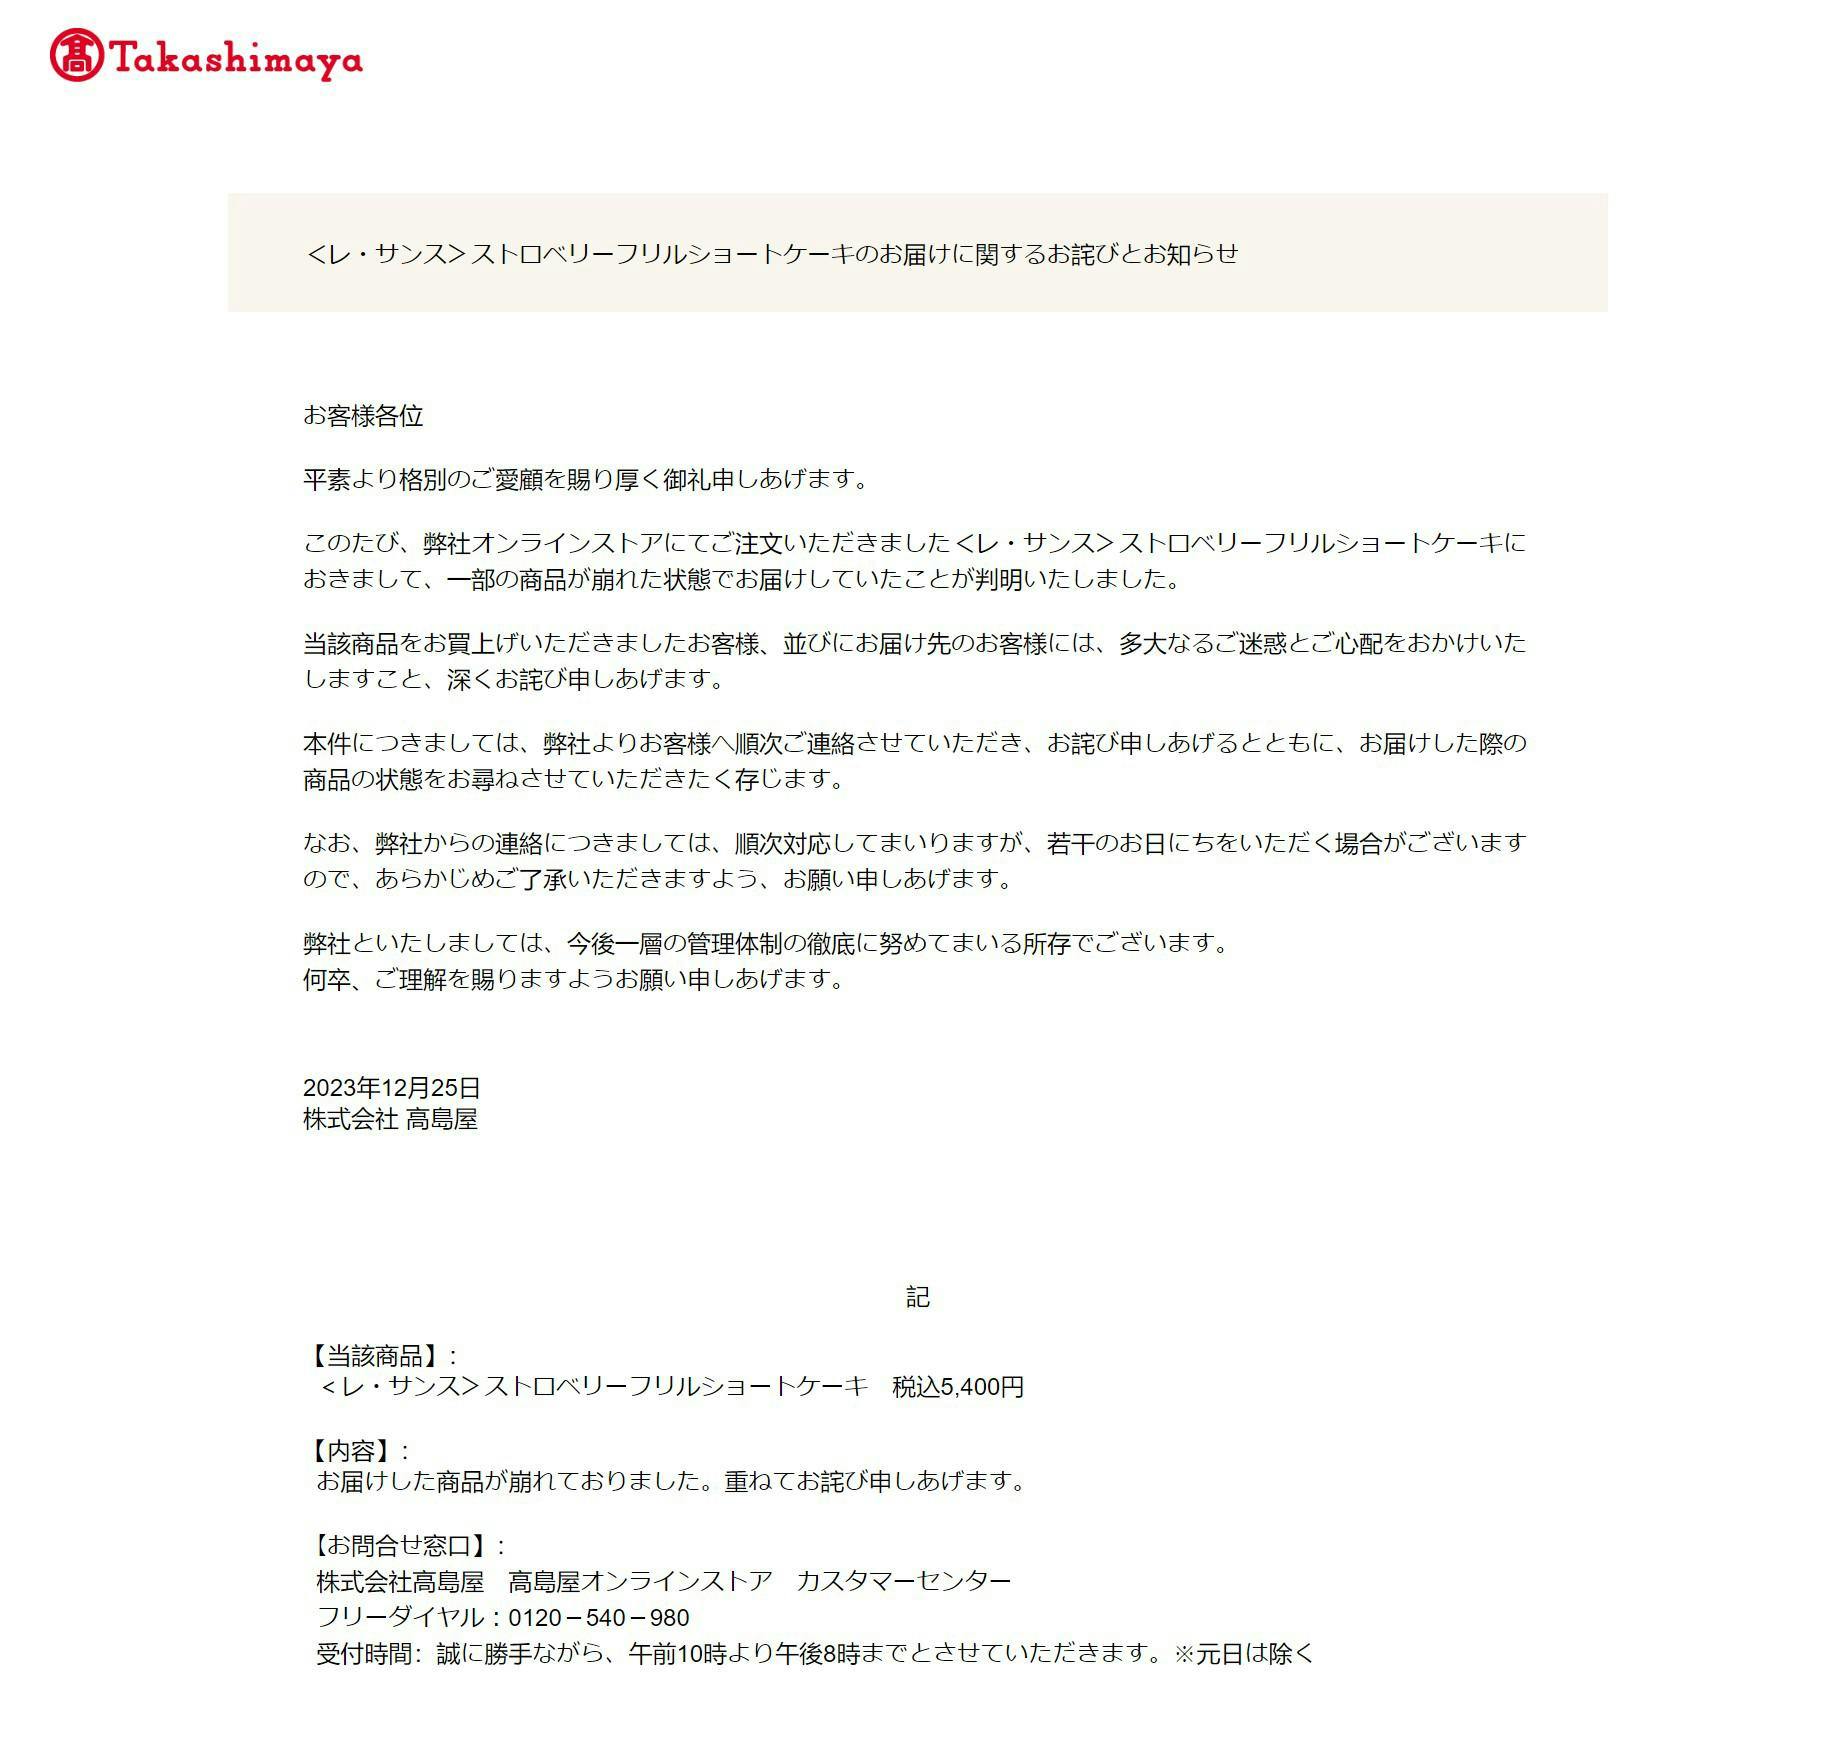 A Japanese department store, Takashimaya's official apology for the Christmas Cake incident